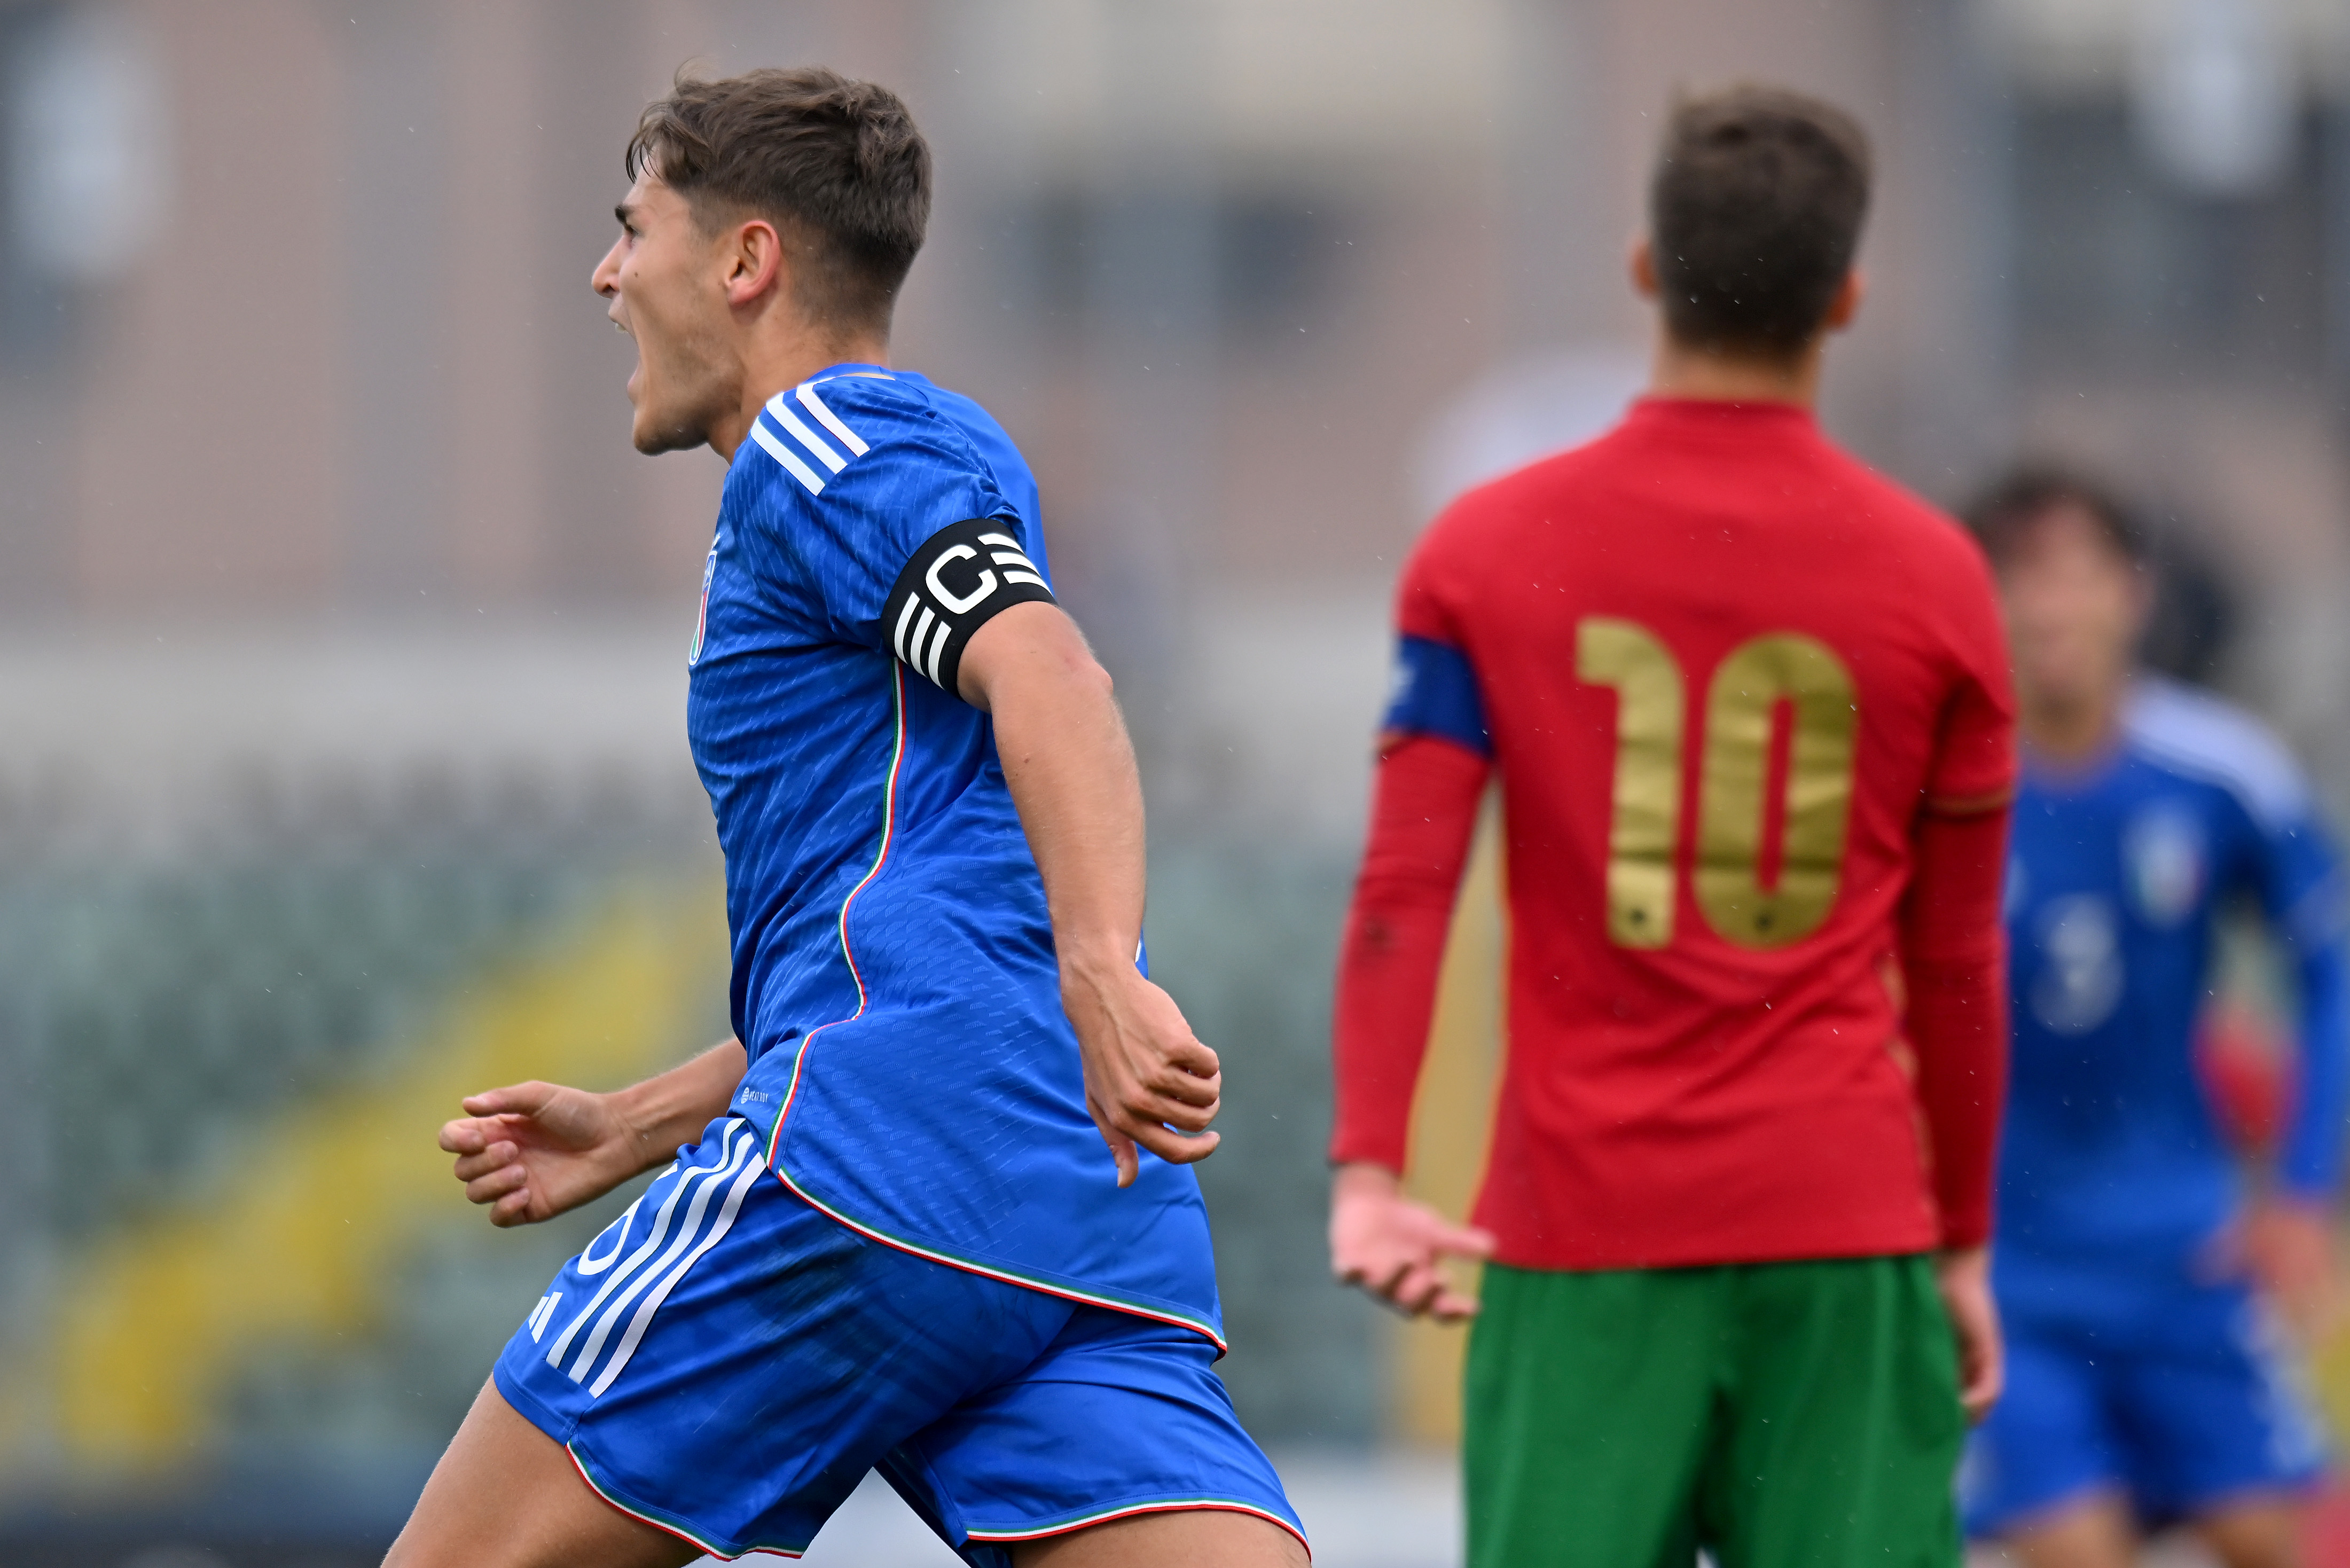 U20 Elite League: Italy held to 1-1 draw by Portugal